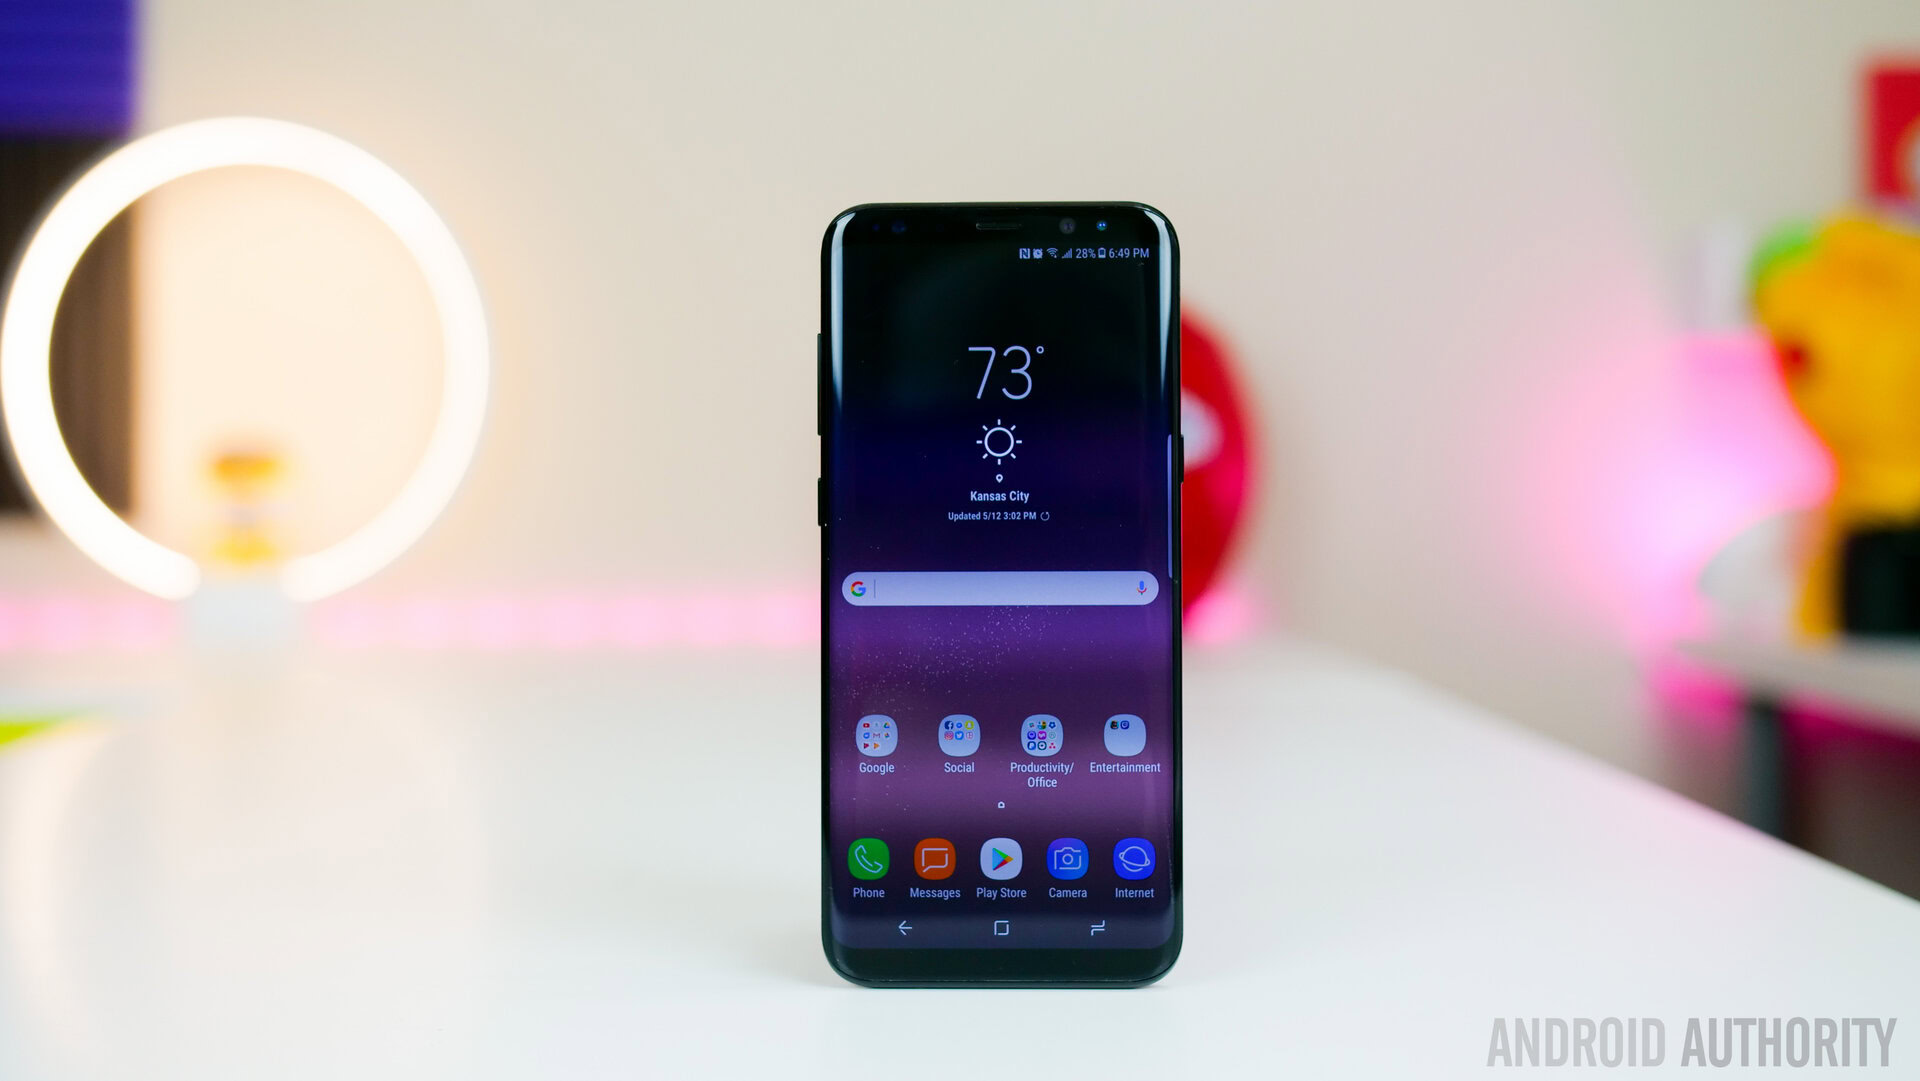 10 ways you can speed up your Samsung Galaxy S8